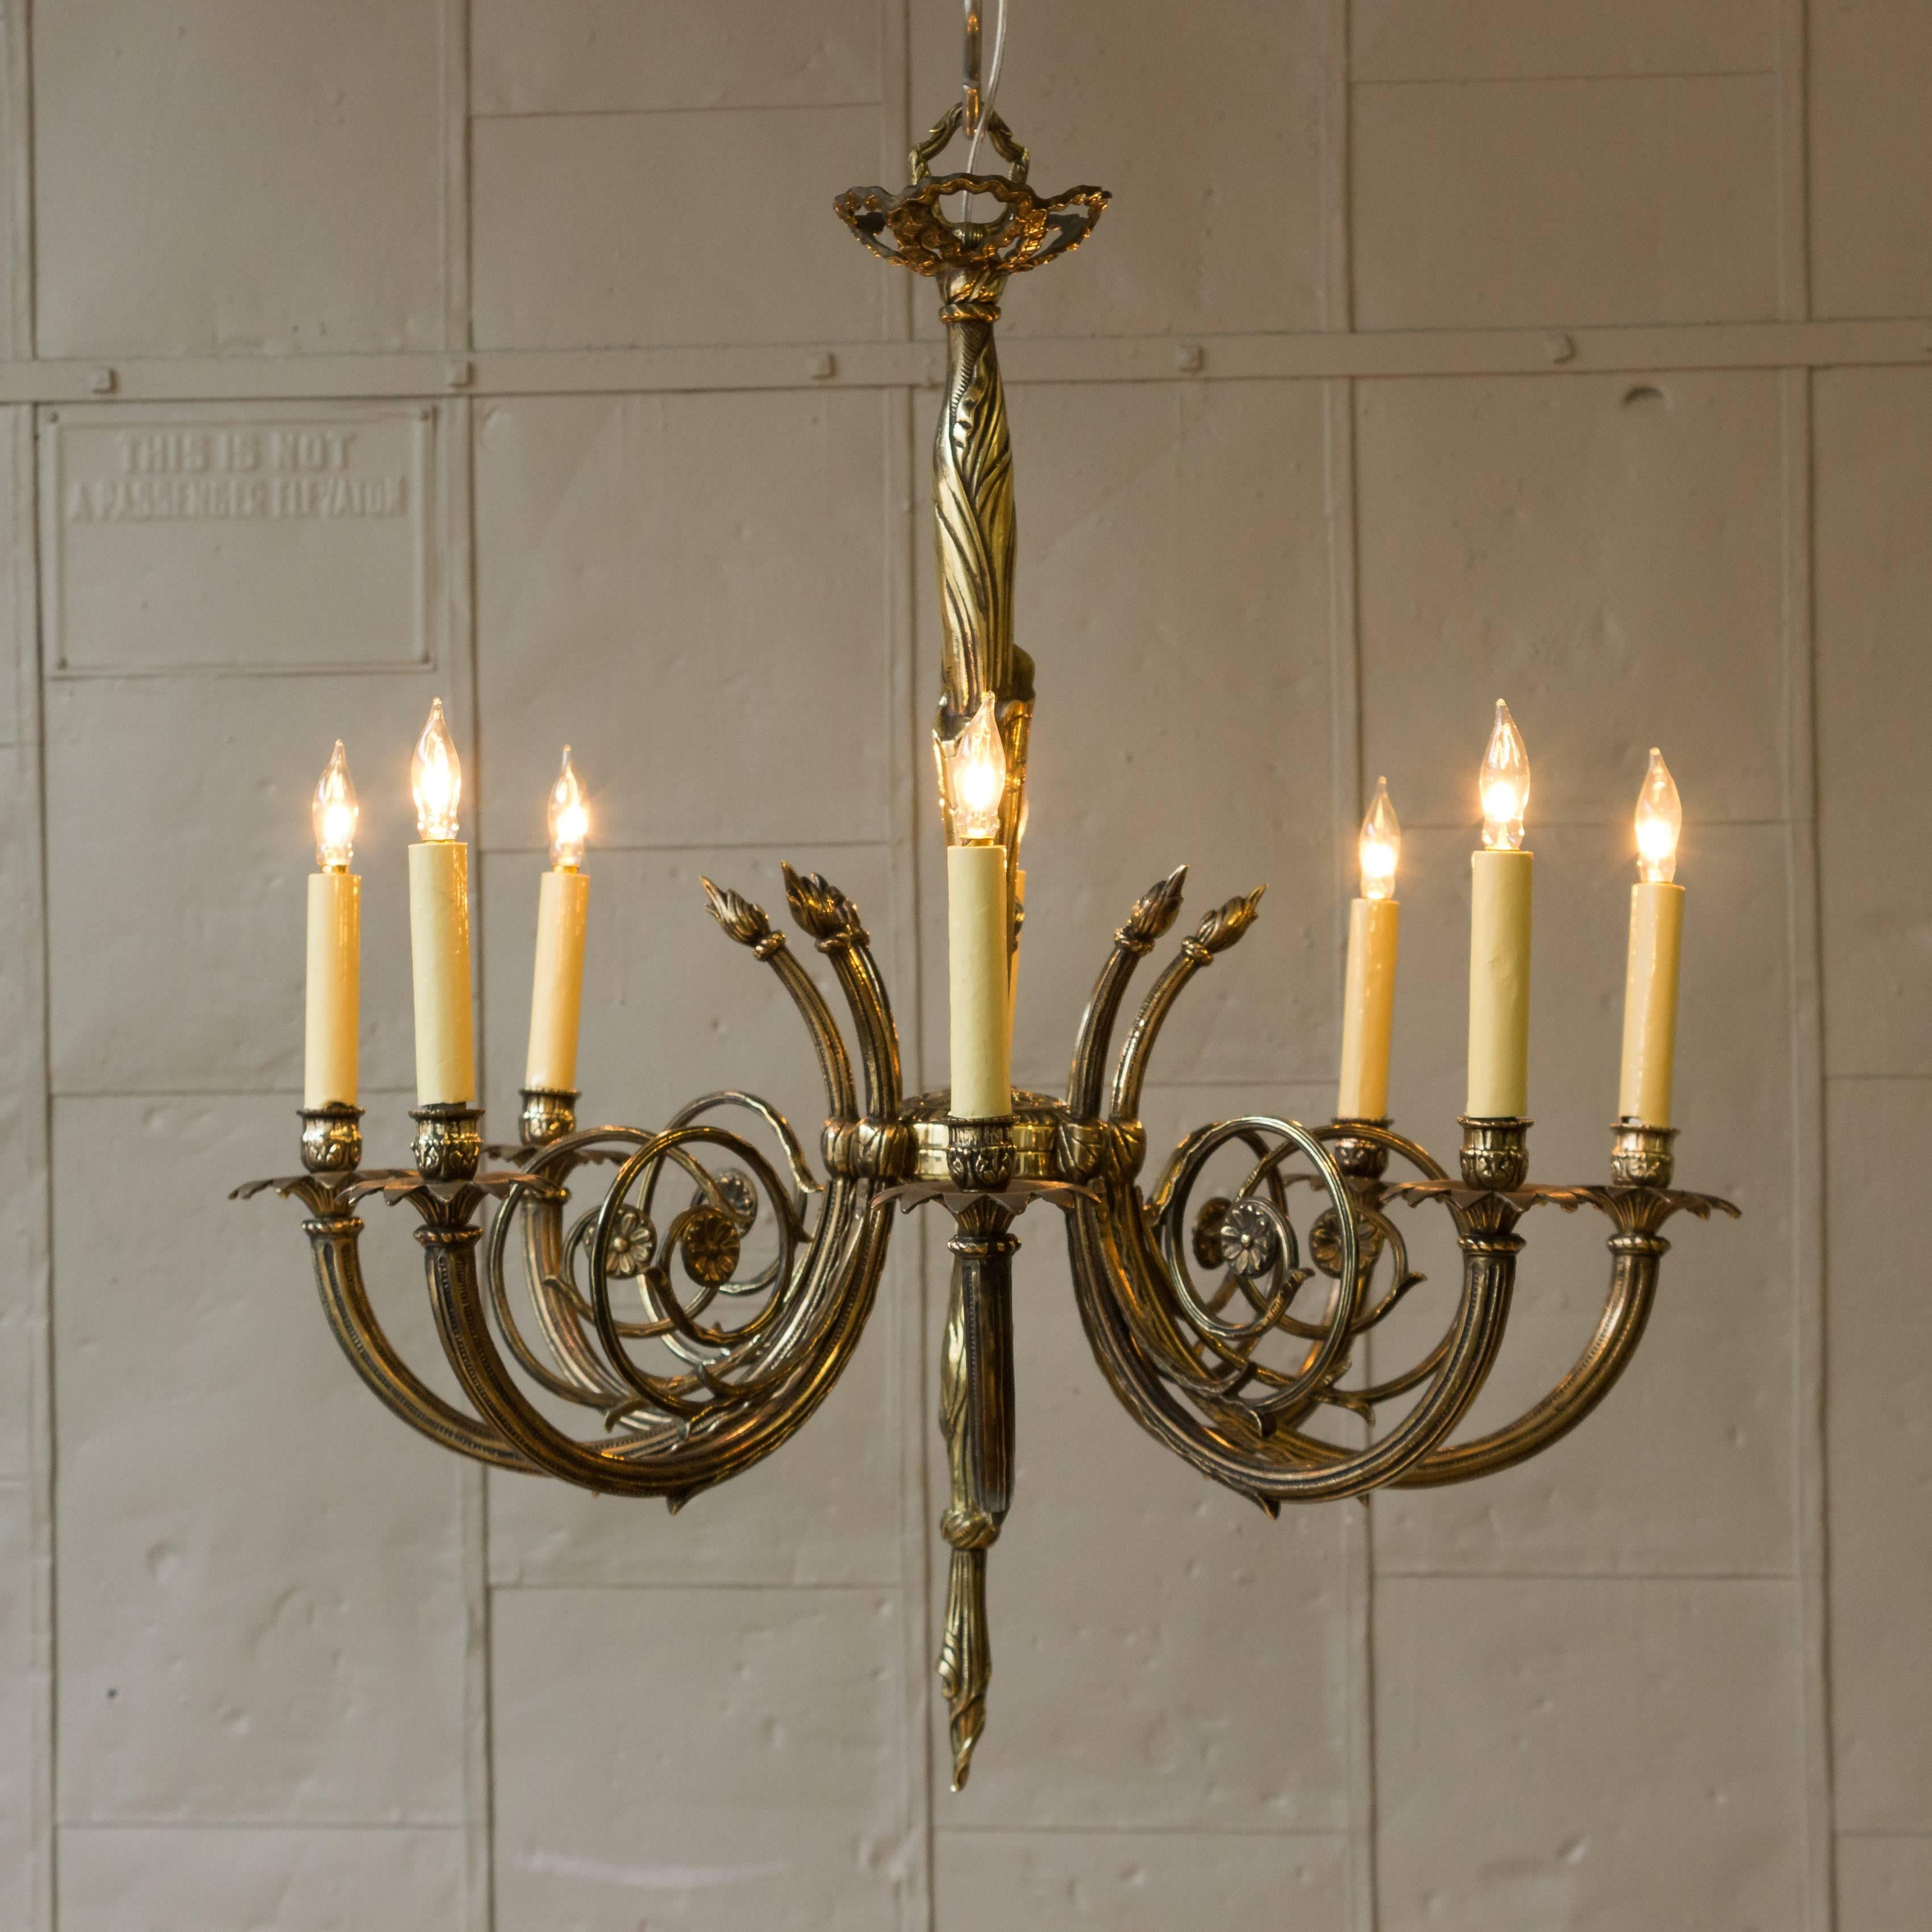 This beautifully detailed 1920s French Art Deco style chandelier is made of brass with bronze components. This elegant chandelier is composed of eight spiraling arms and the center stem has stylized drapery details. In very good vintage condition,